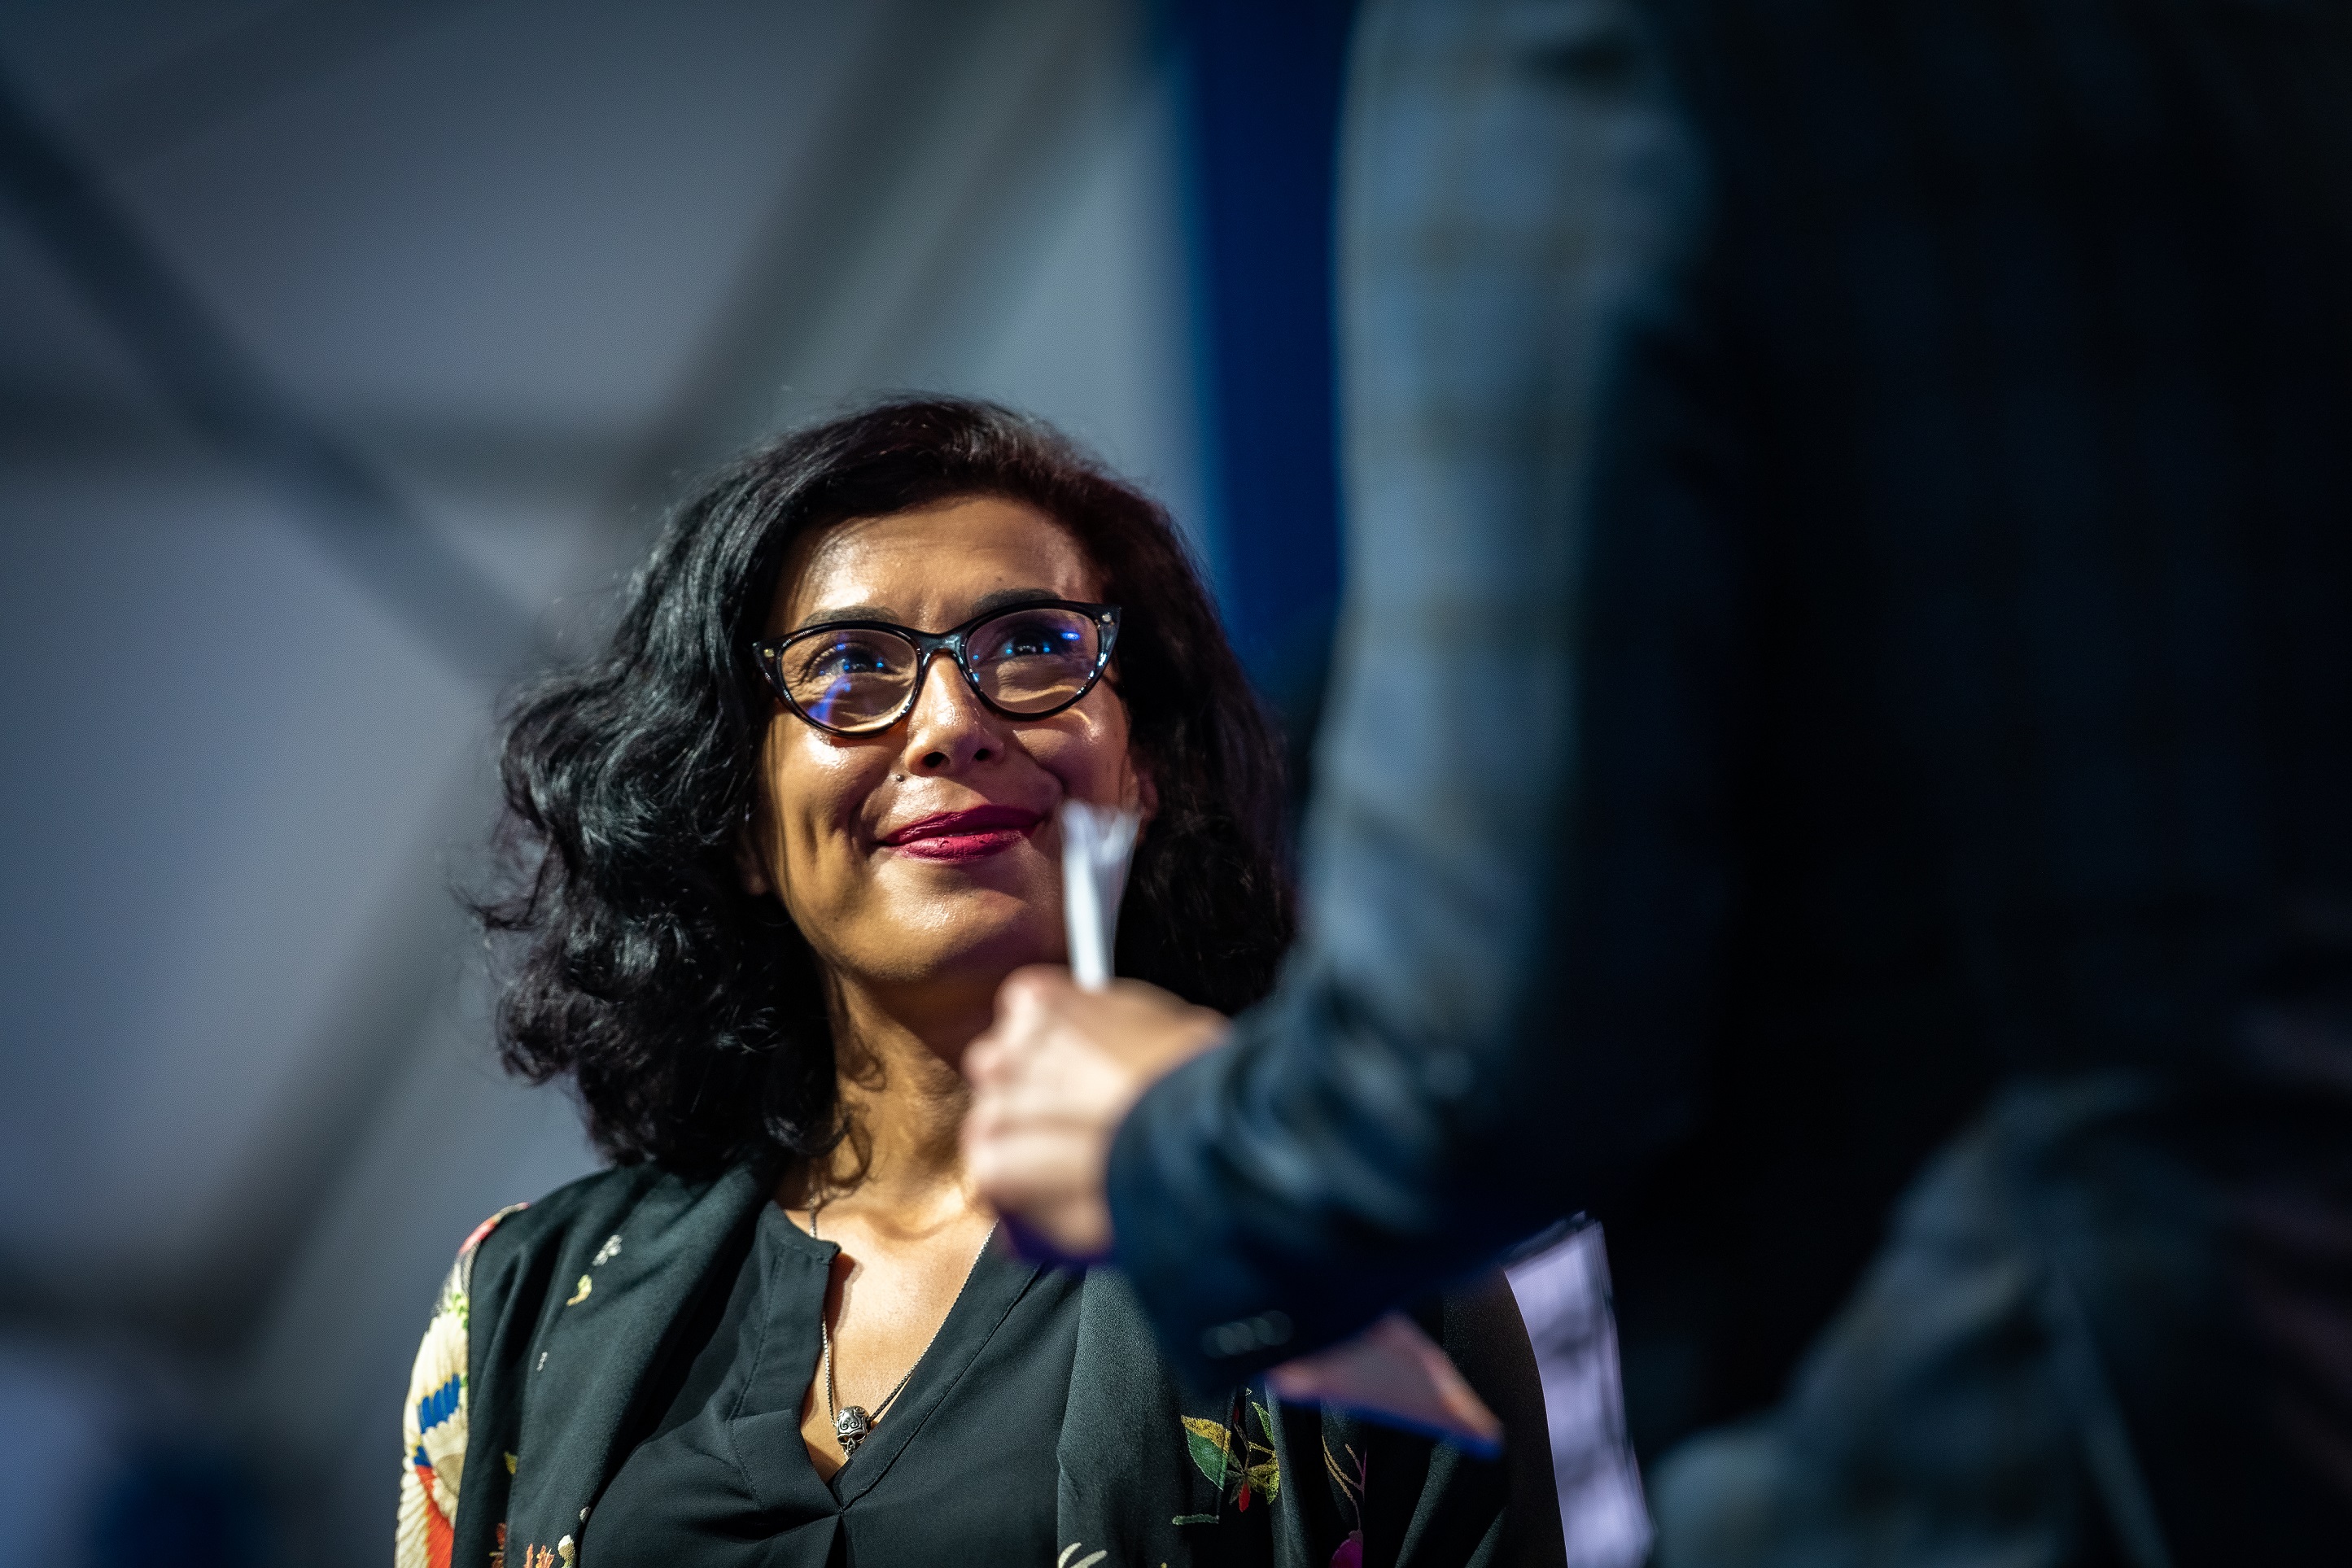 Nadia Khiari, cartoonist, was the godmother of the international panel of judges in 2021